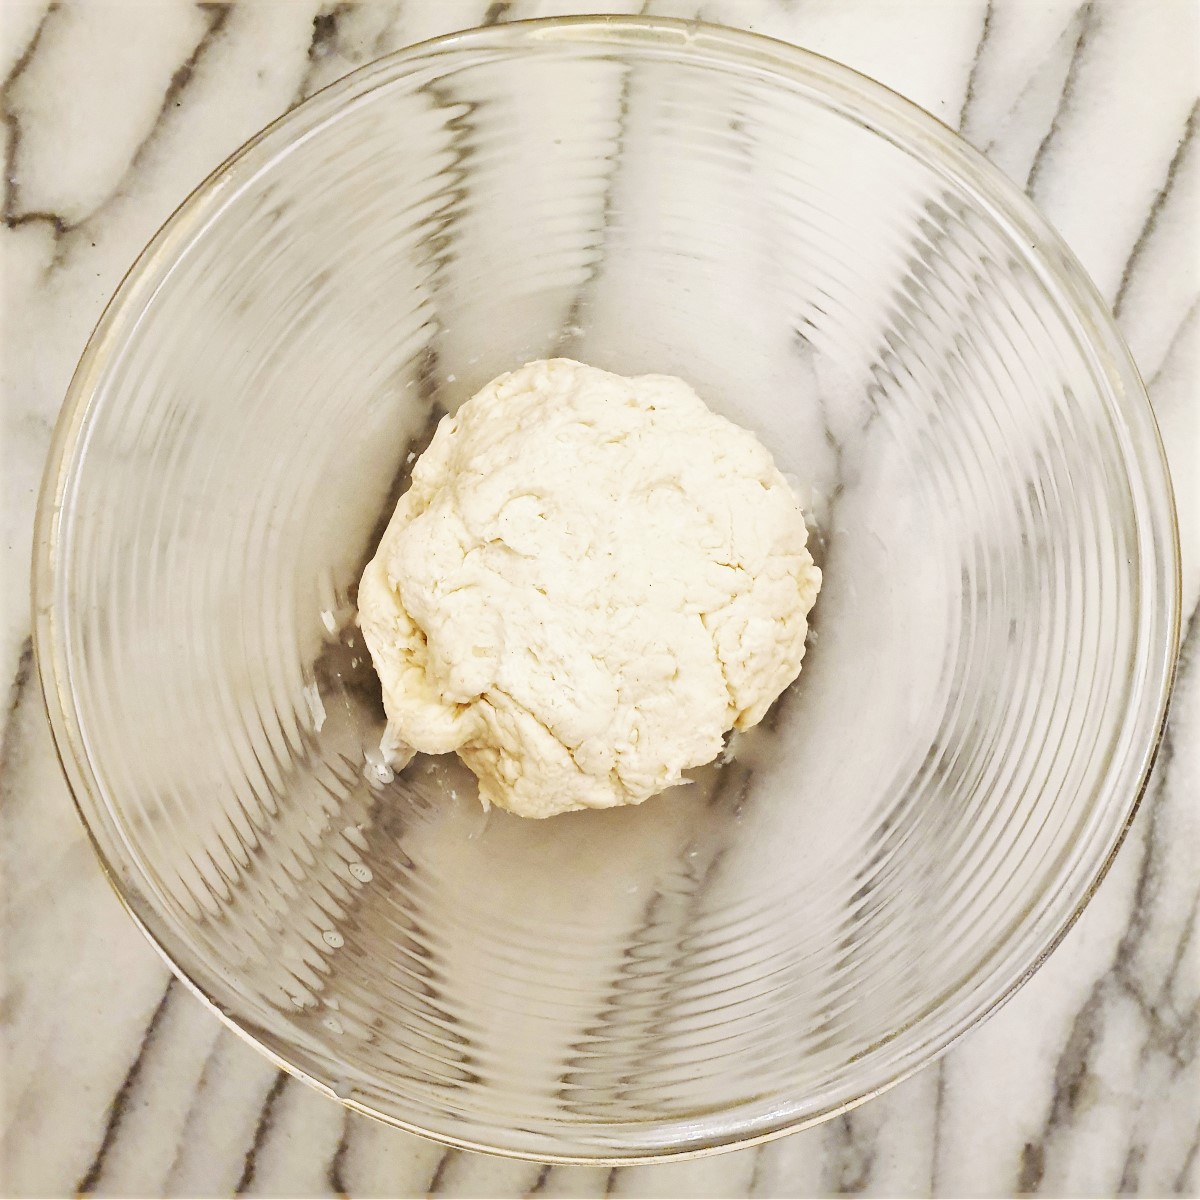 A ball of 2-ingredient dough.